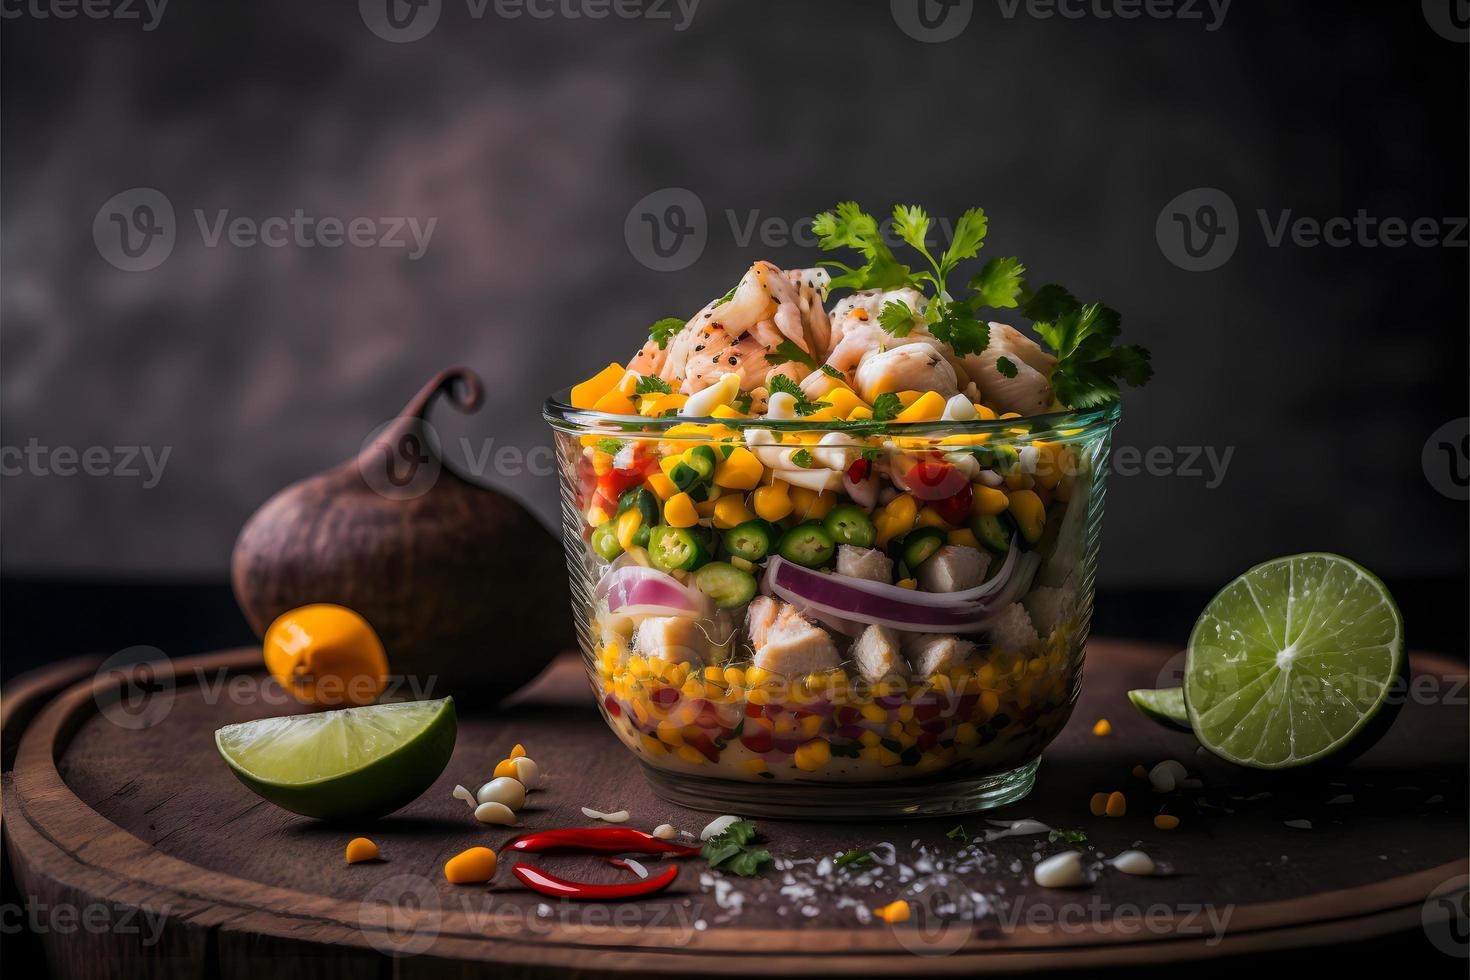 Ceviche High-quality images showcase this beloved traditional dish in all its glory, from classic street food to gourmet styles. Perfect for cookbooks, food blogs, menu photo